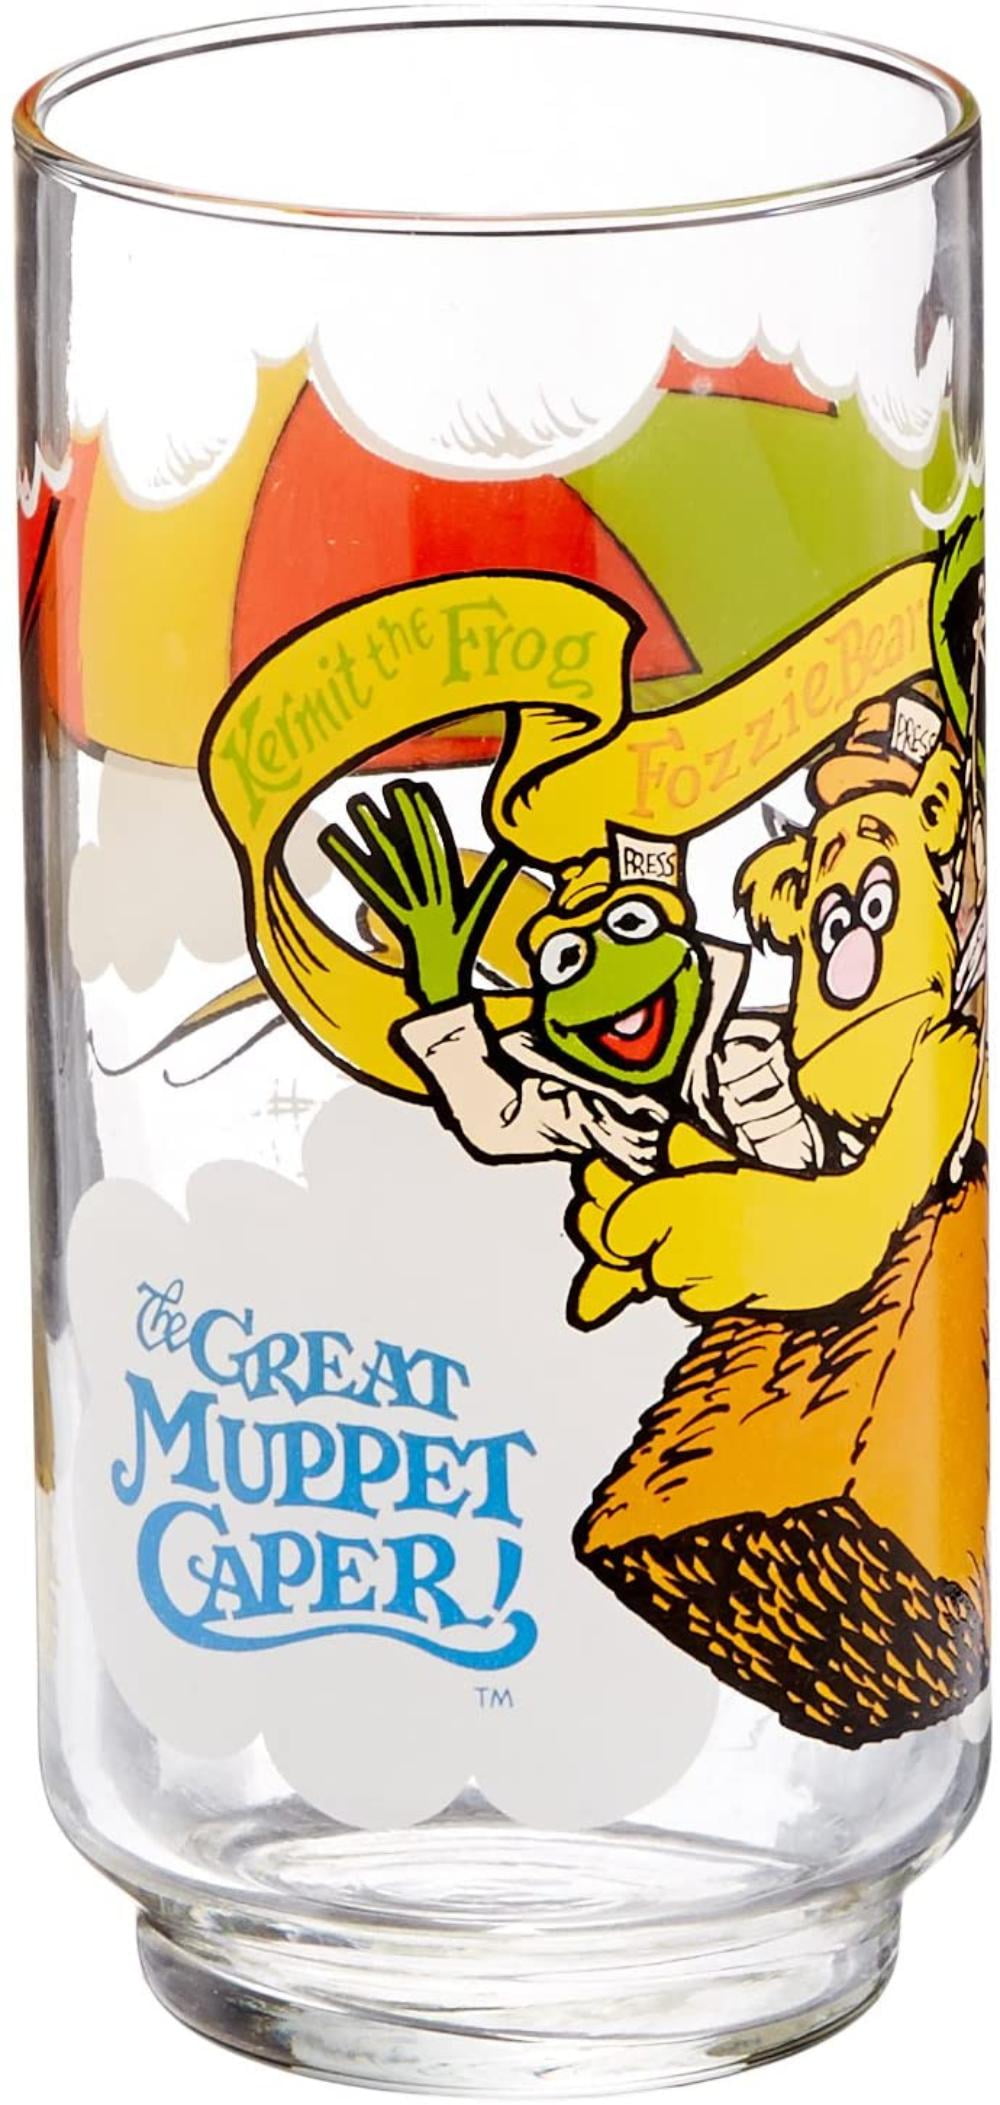 Hot Air Balloon The Muppets Henson Associates Inc. 1981 McDonald's Collectible Glass The Great Muppet Caper